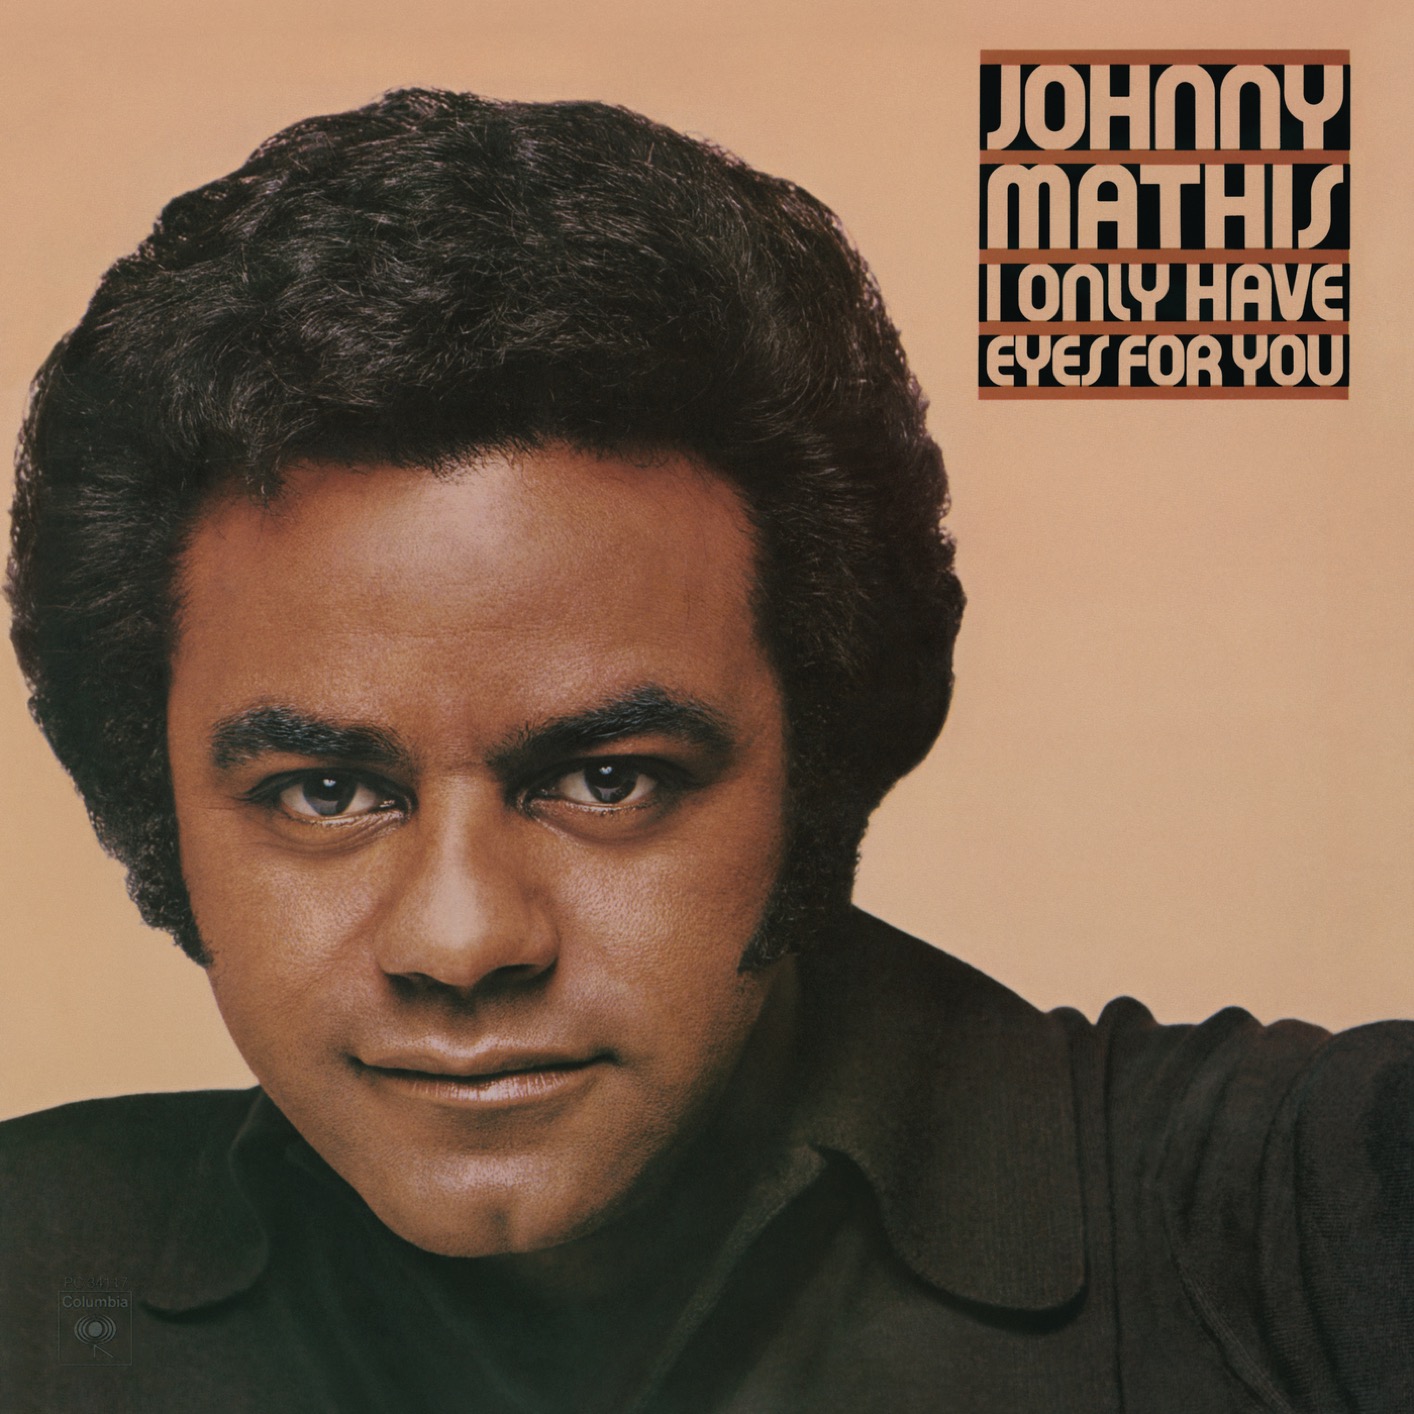 Johnny Mathis - I Only Have Eyes For You (1976/2018) [FLAC 24bit/96kHz]